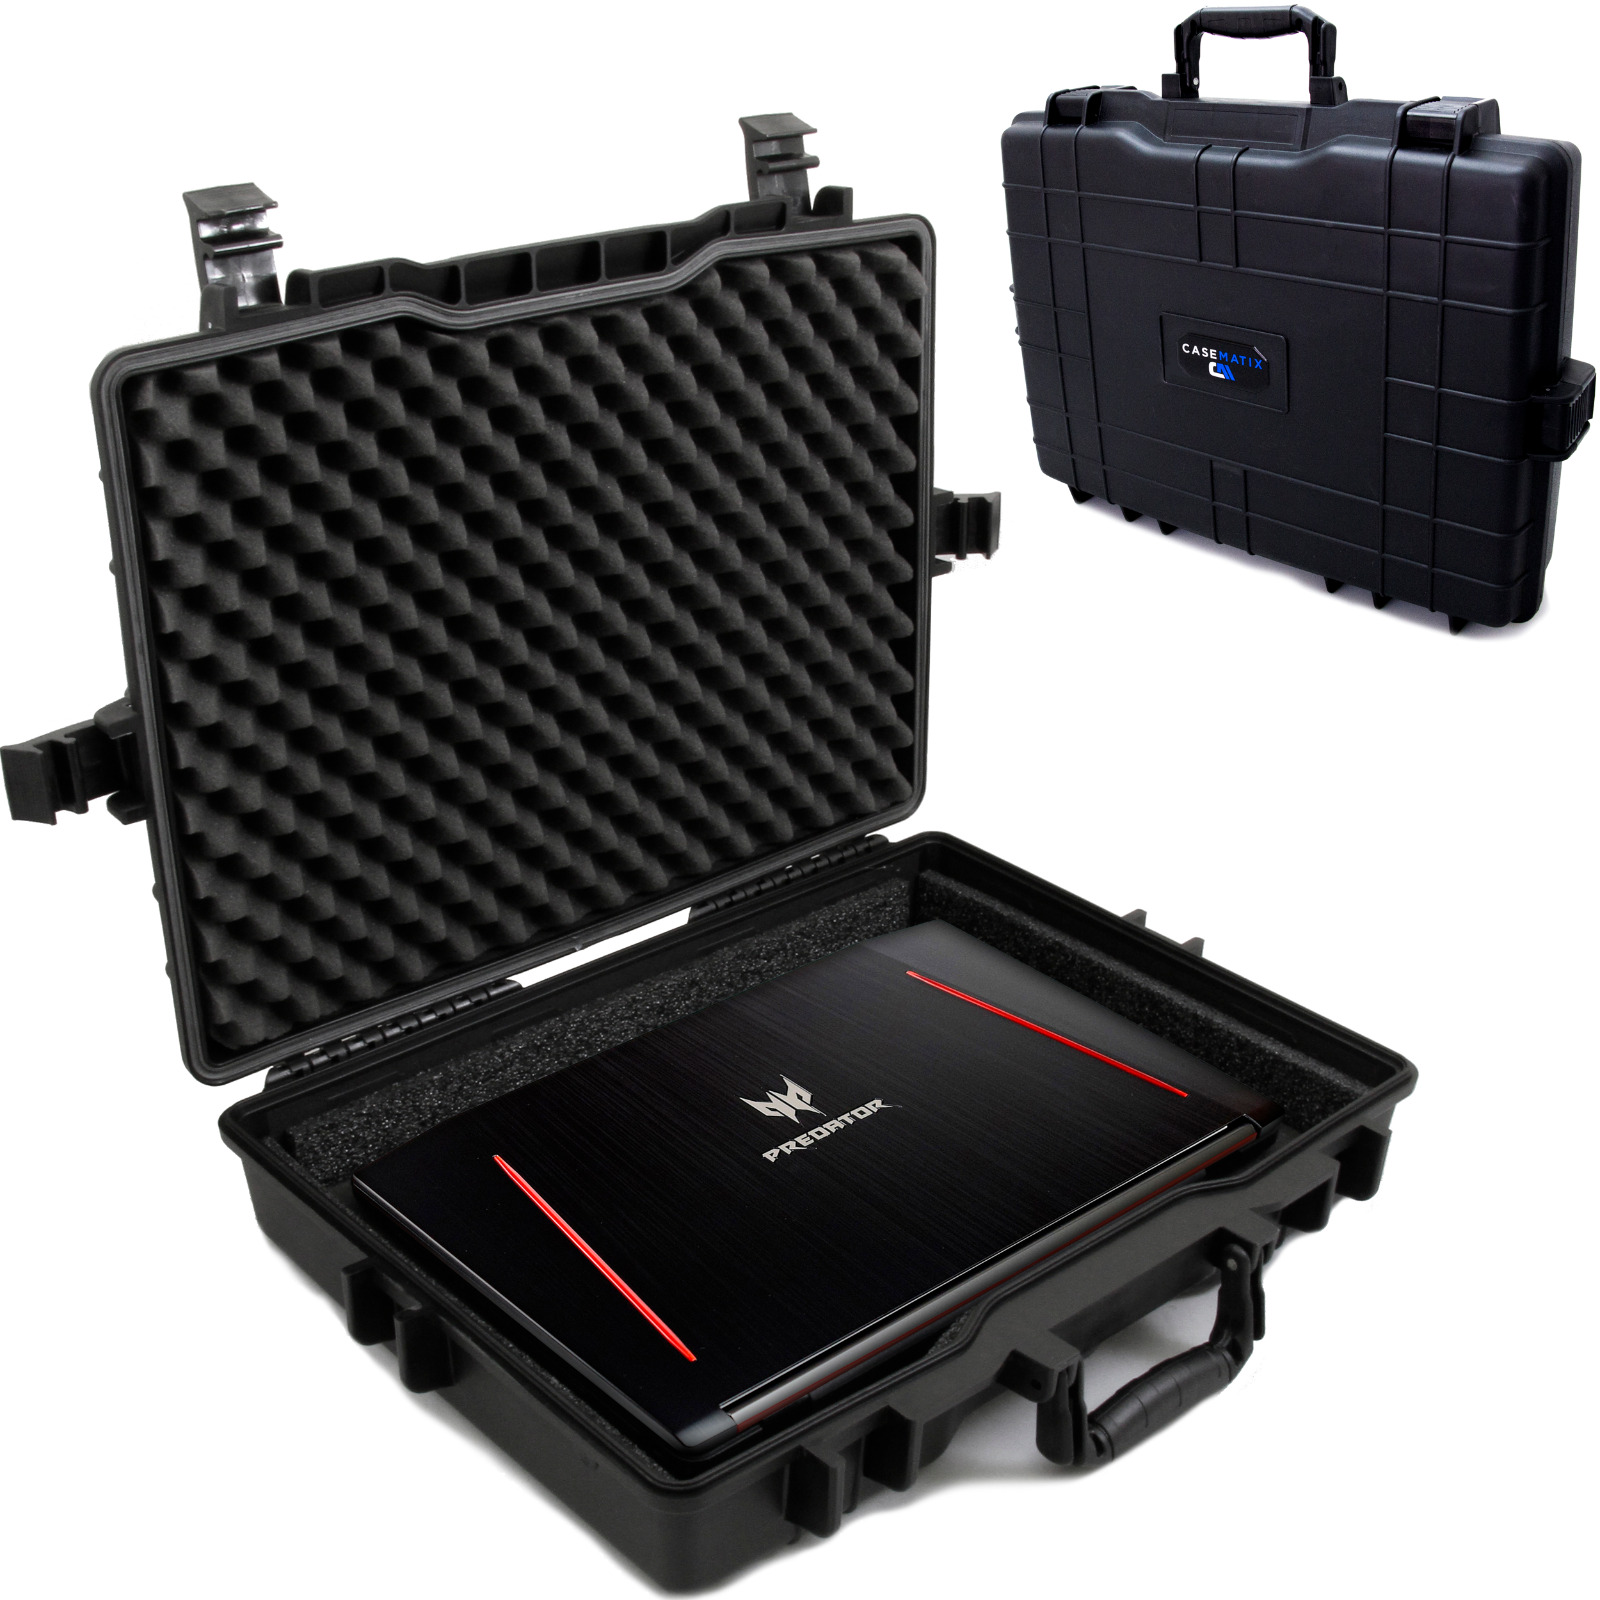 CM Waterproof Laptop Hard Case for 15-17 inch Gaming Laptops & Accessories- USED